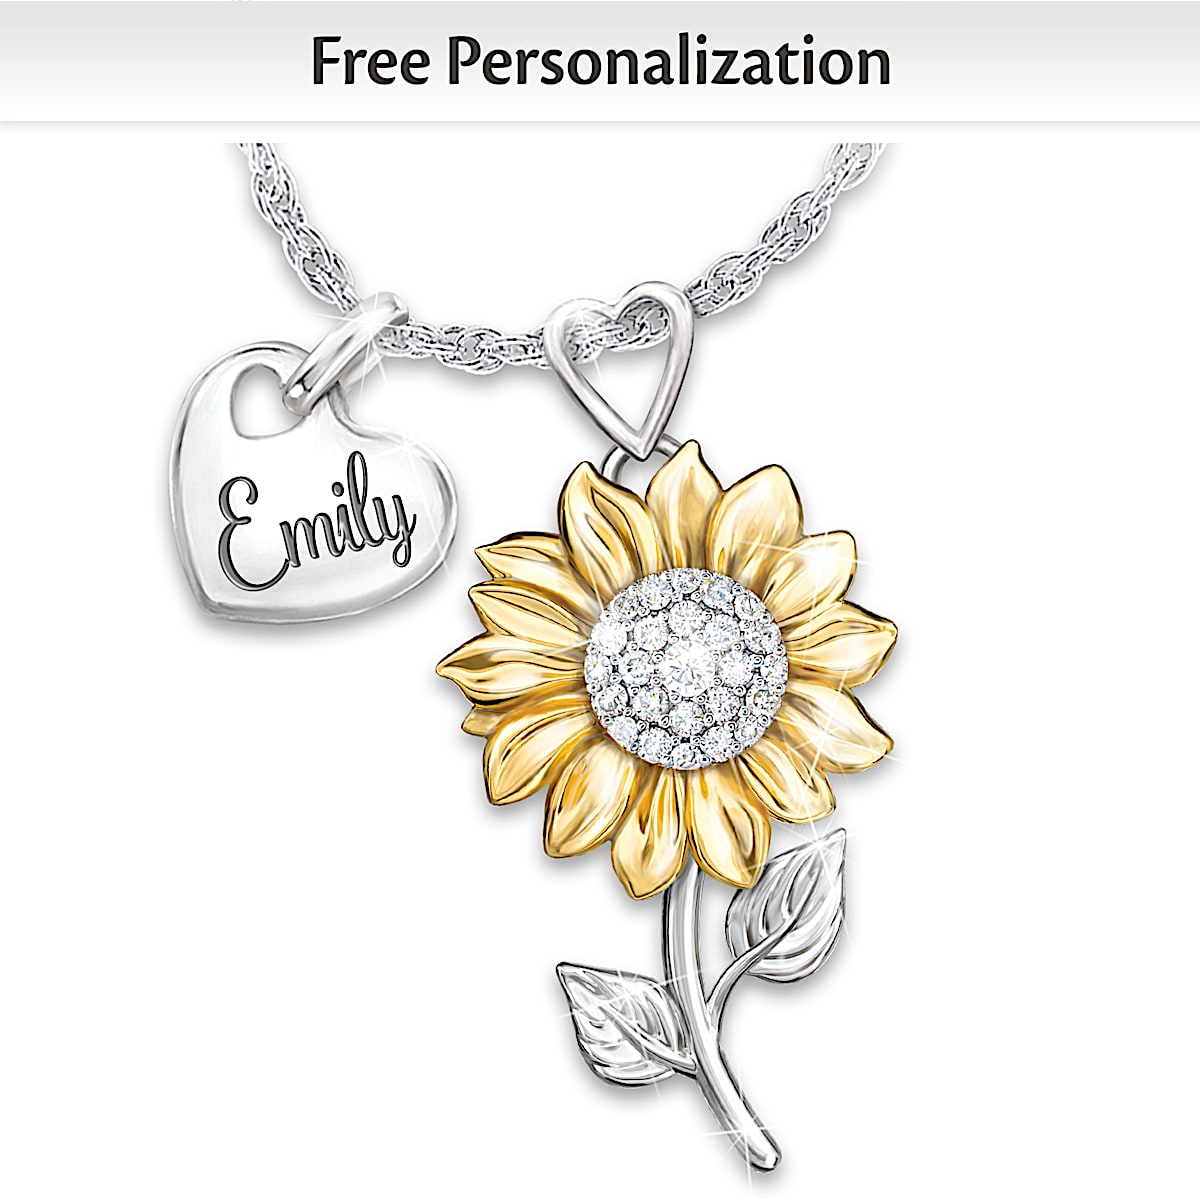 Sunflower Pendant With 18K Gold-Plated Accents And Engraved Charm